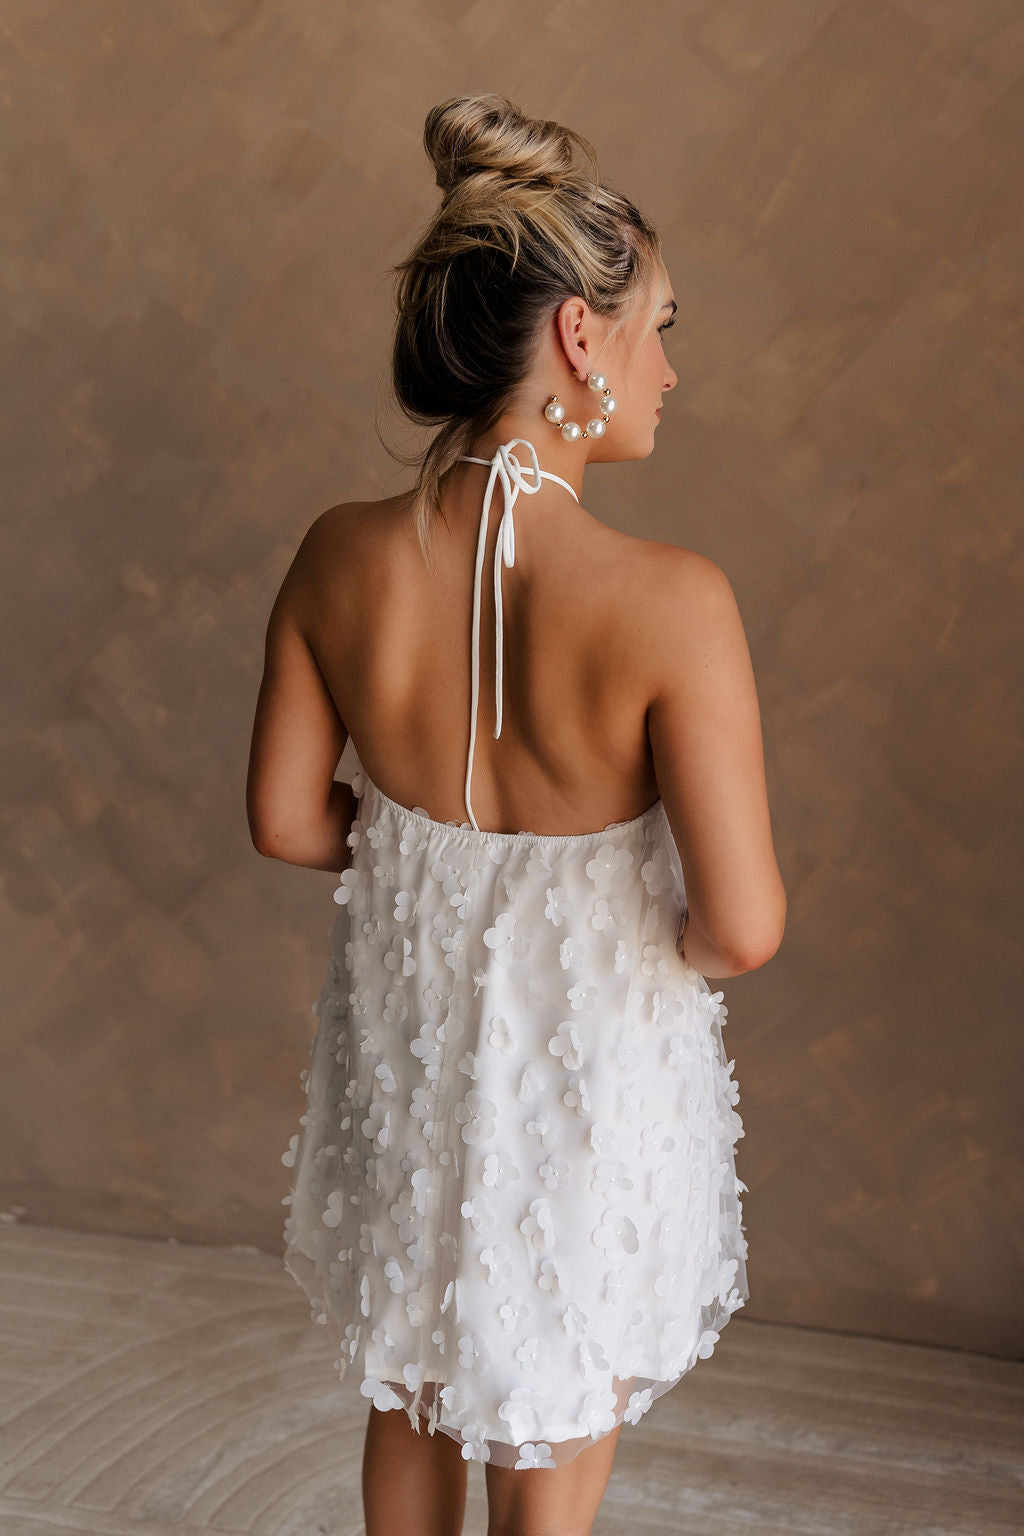 Upper body back view of female model wearing the Meredith White Embellished Floral Dress that has white sheer fabric with 3d floral embellishments, white lining, and a halter neck.